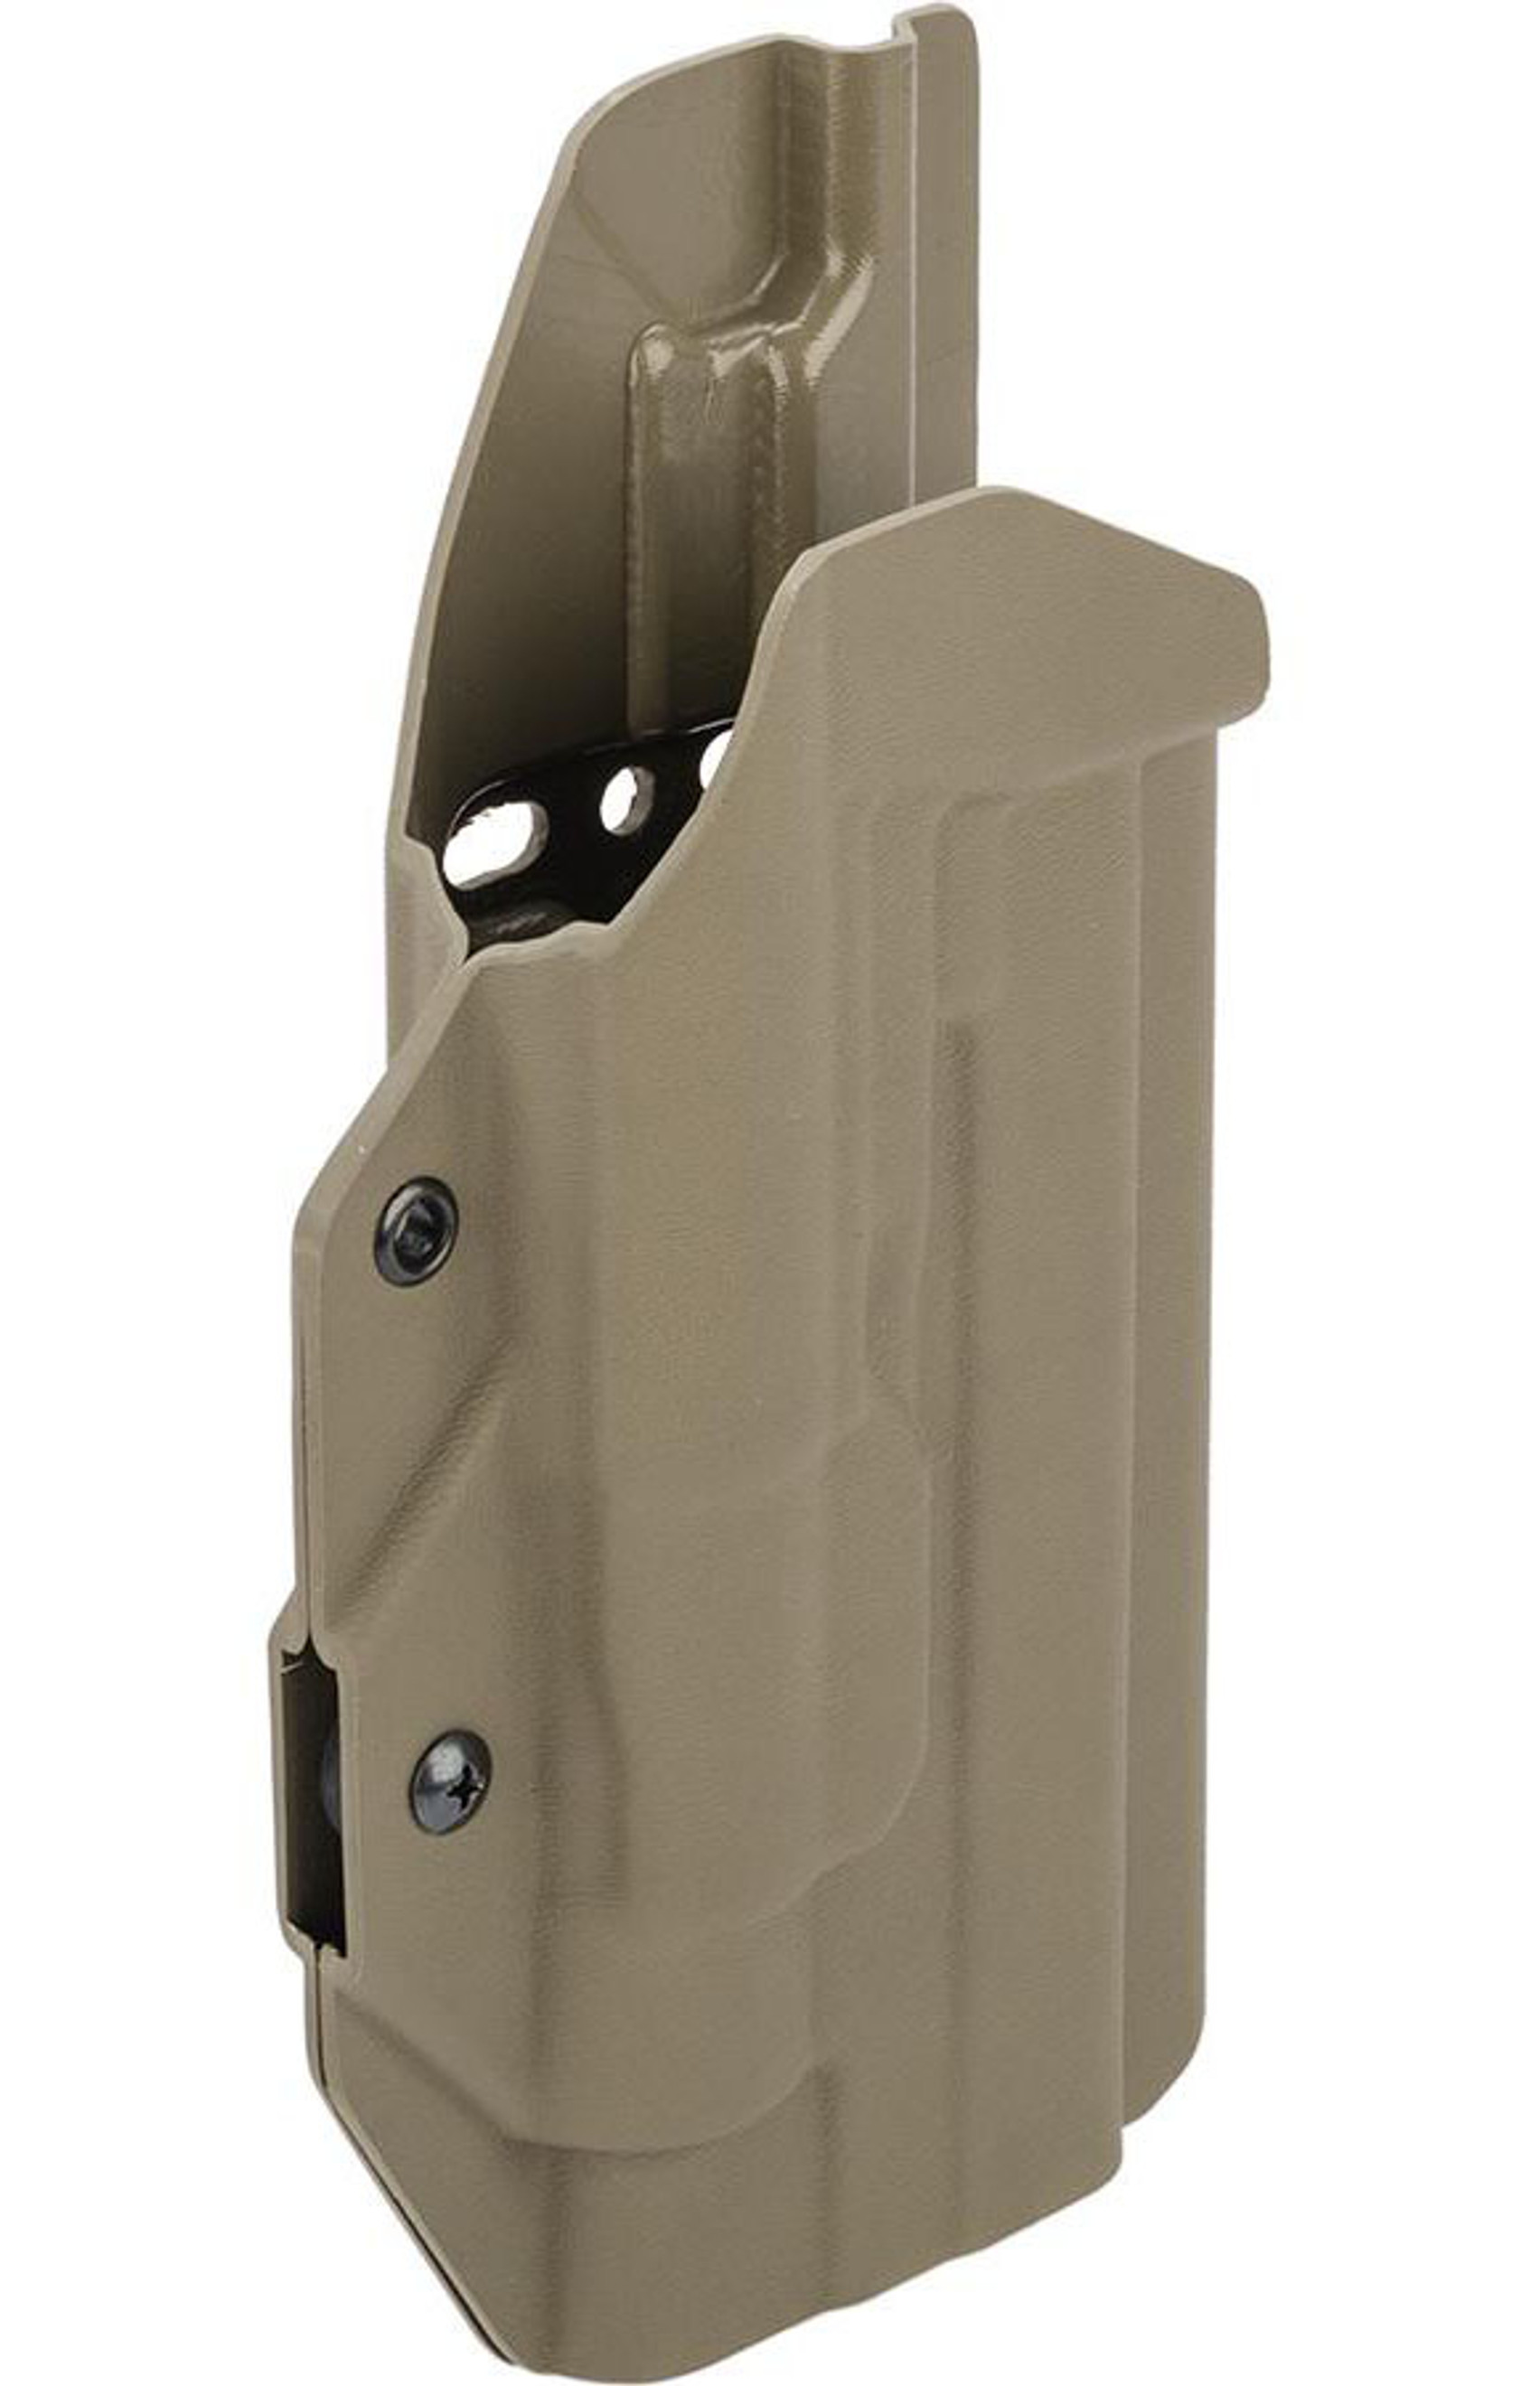 MC Kydex Airsoft Elite Series Pistol Holster for 1911 w/ TLR-1 Flashlight (Model: Flat Dark Earth / No Attachment / Right Hand)